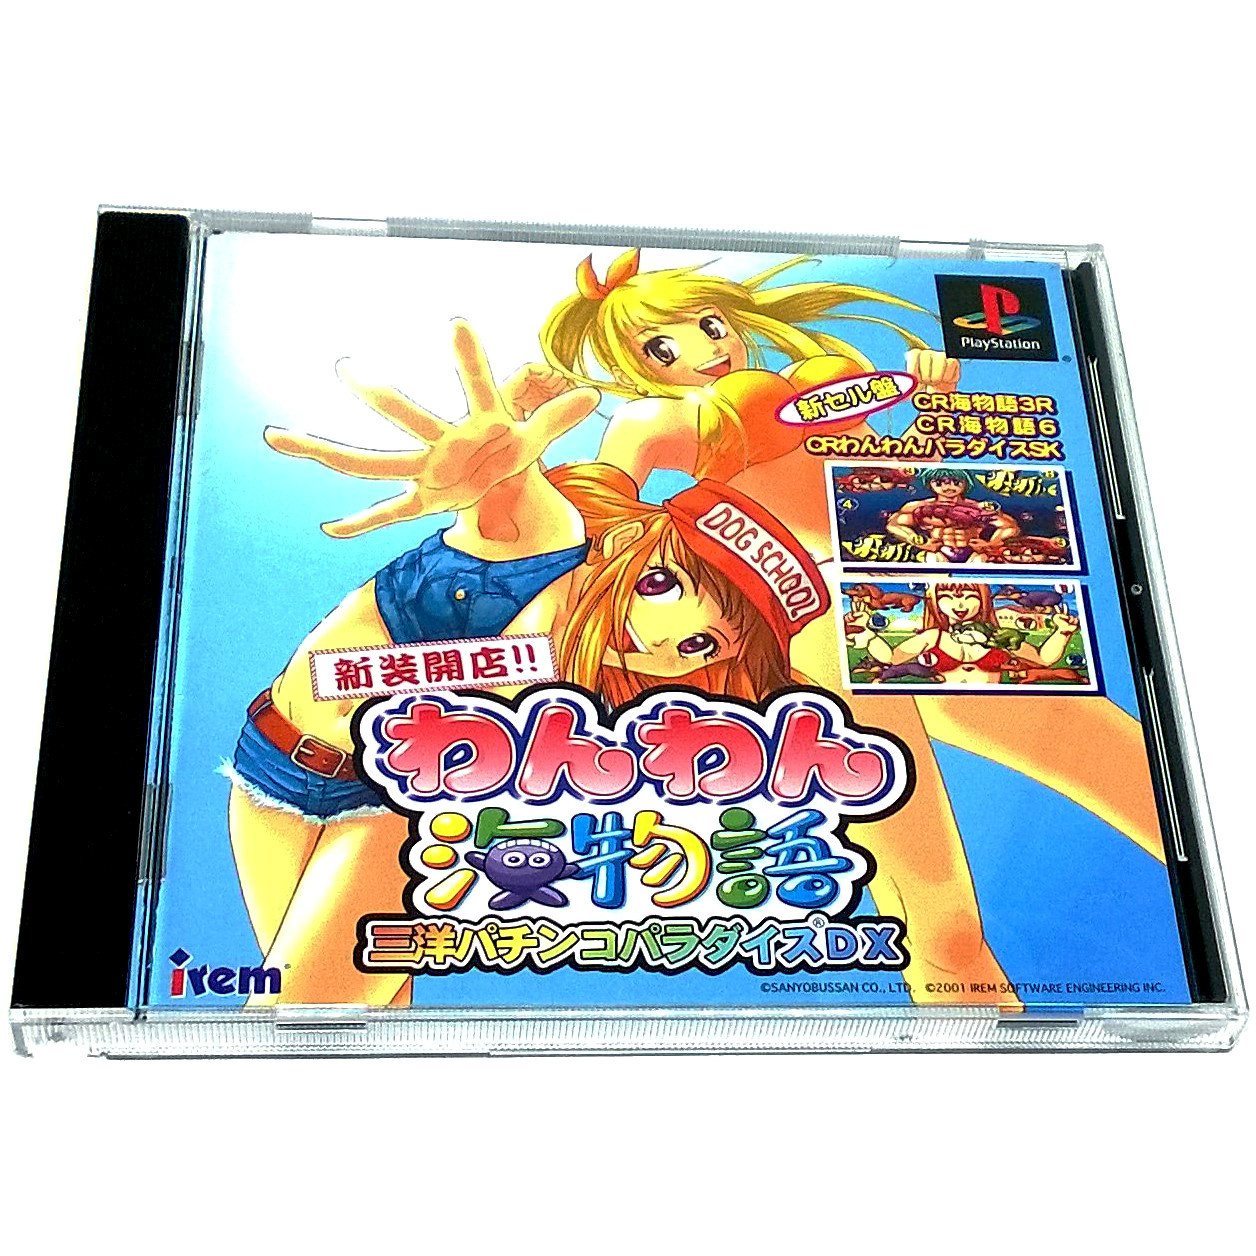 Sanyo Pachinko Paradise DX for PlayStation (import) - Front of case